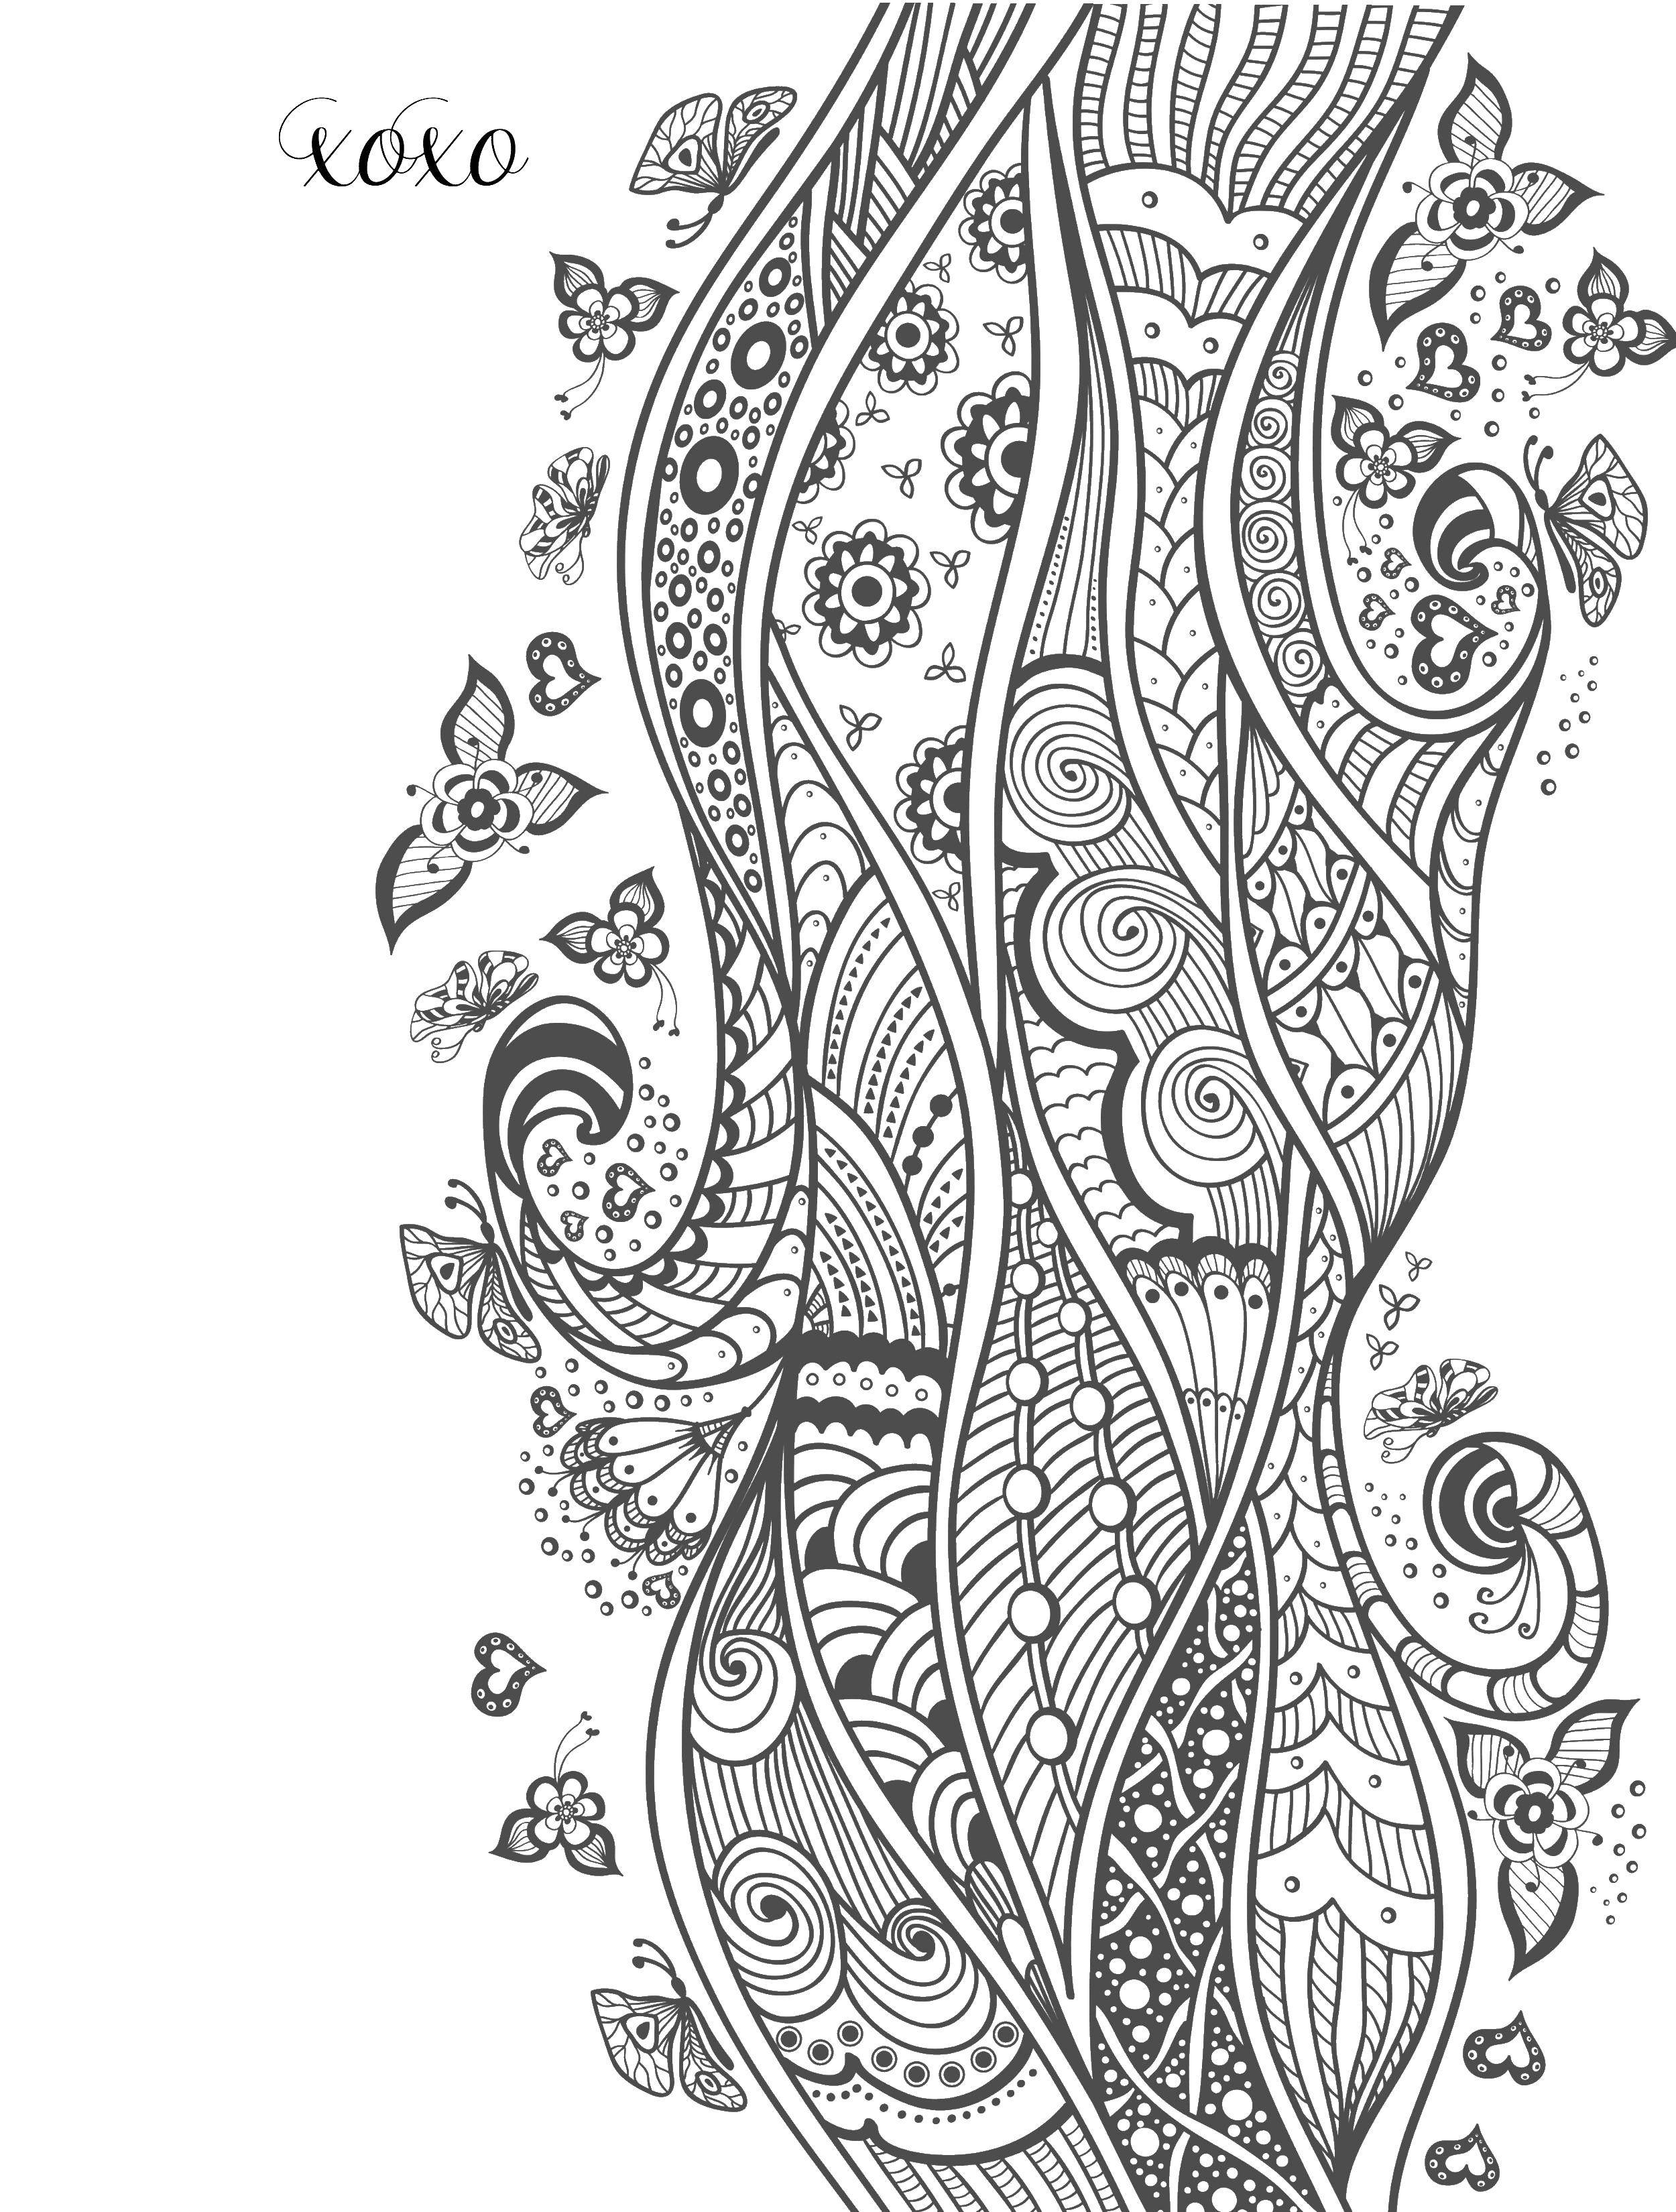 Coloring Flower patterns. Category patterns. Tags:  patterns, flowers.